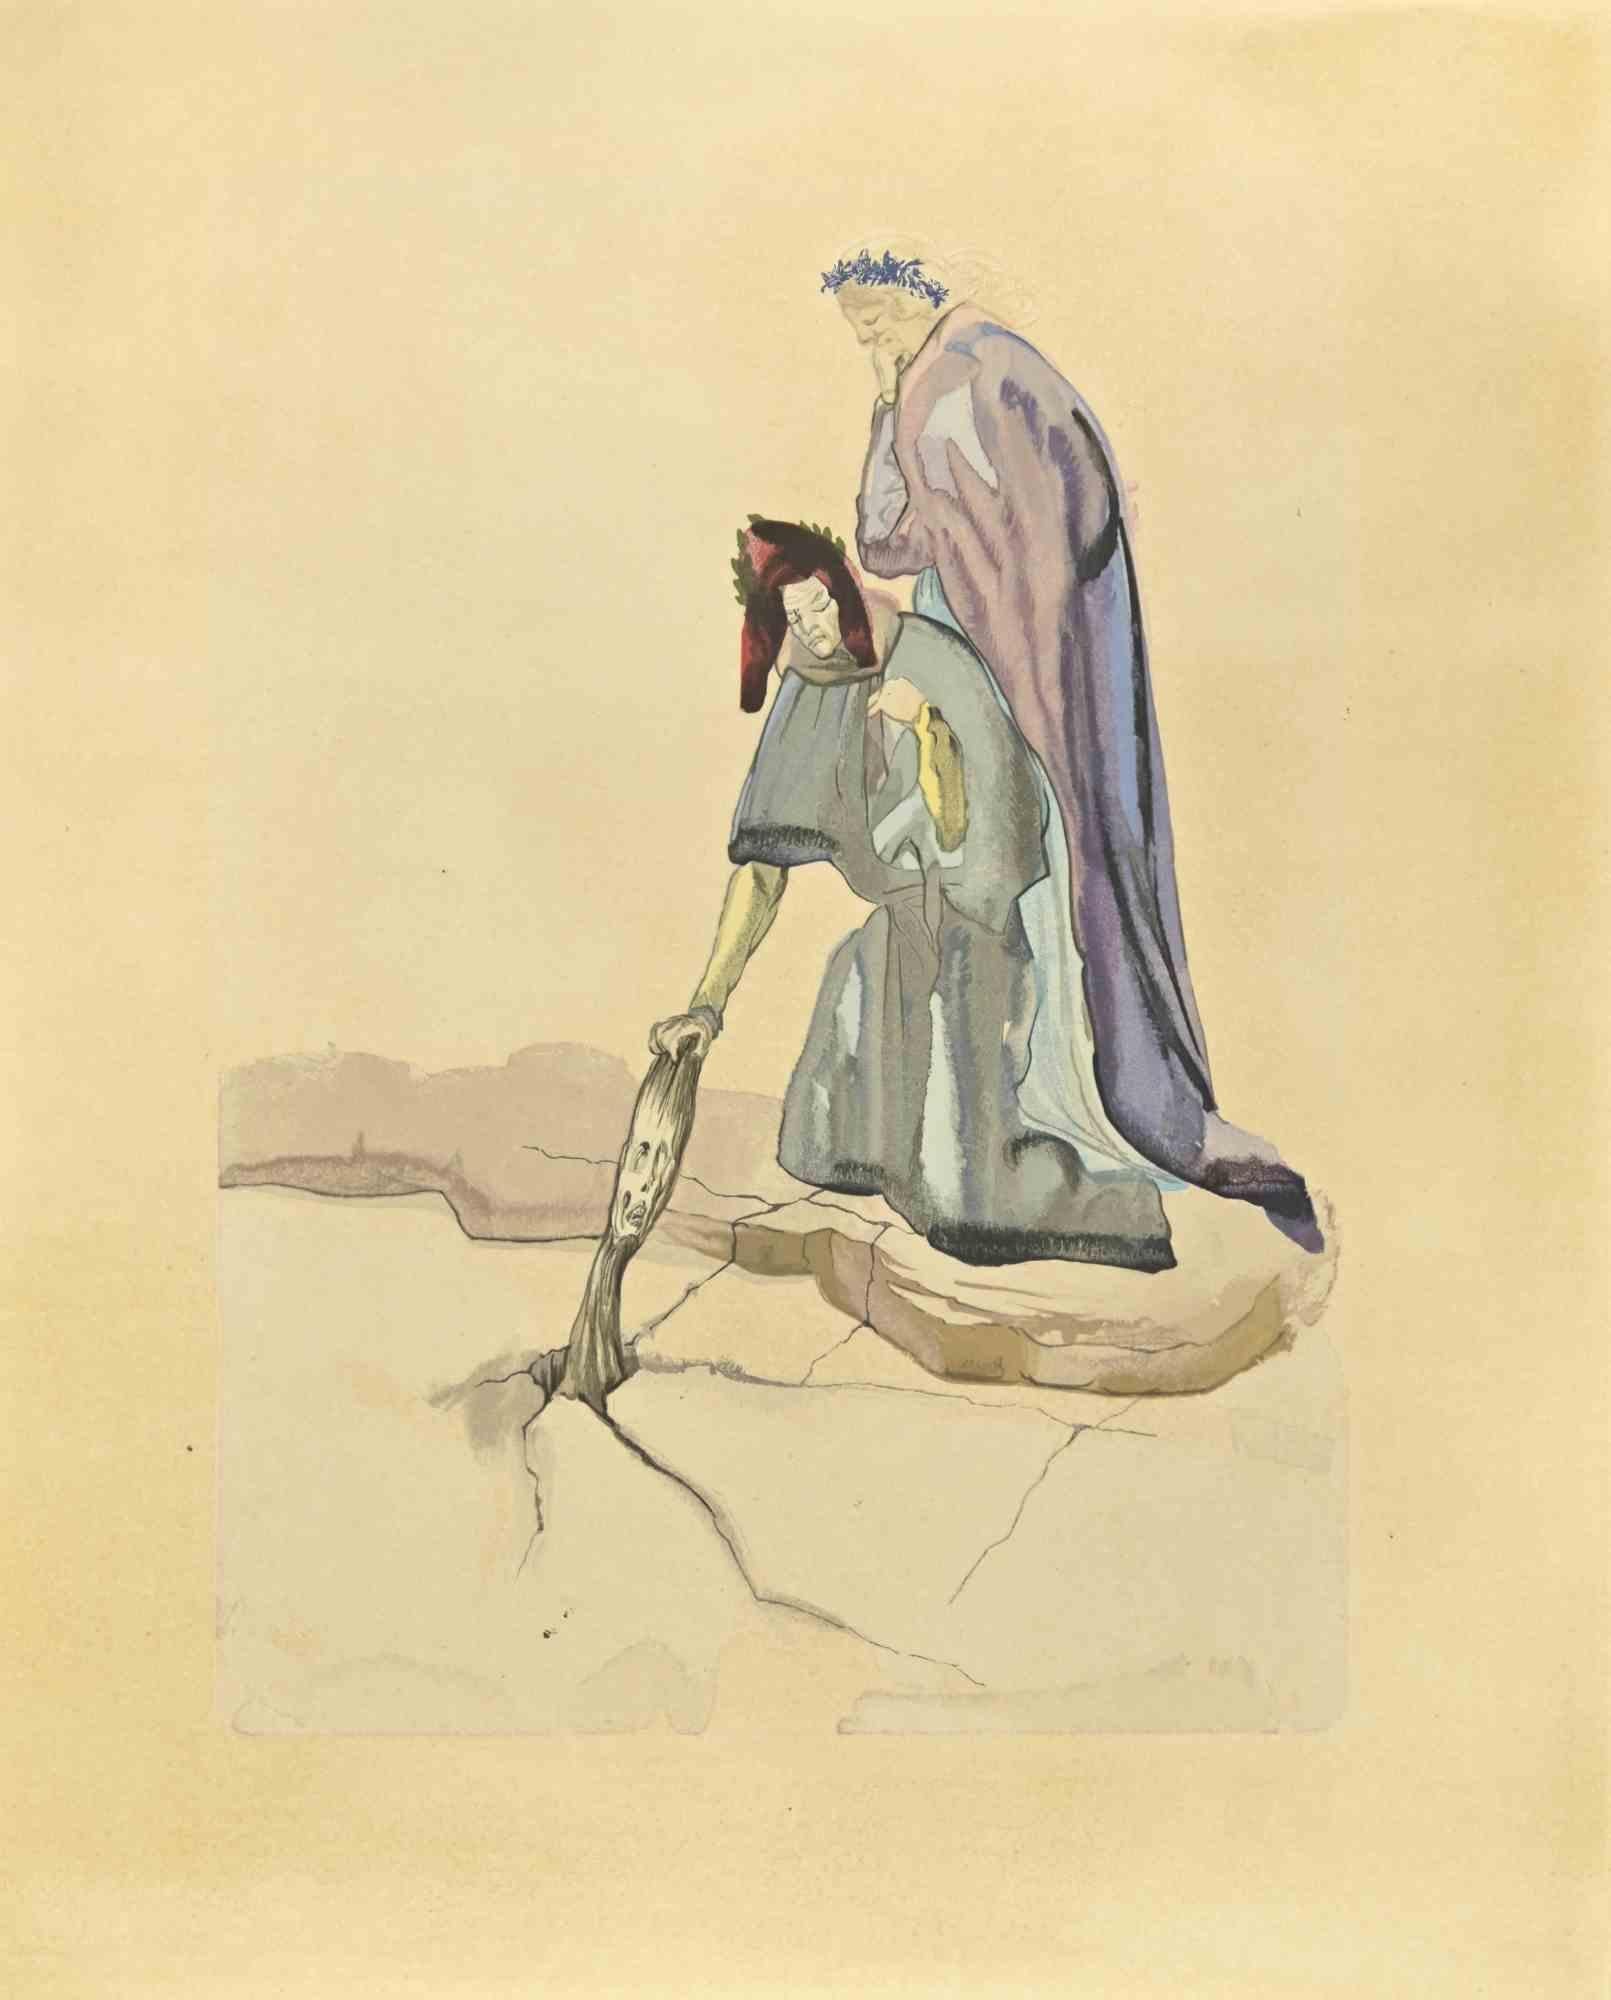 Salvador Dalí Figurative Print - The Traitor of Montaperti - Woodcut - 1963